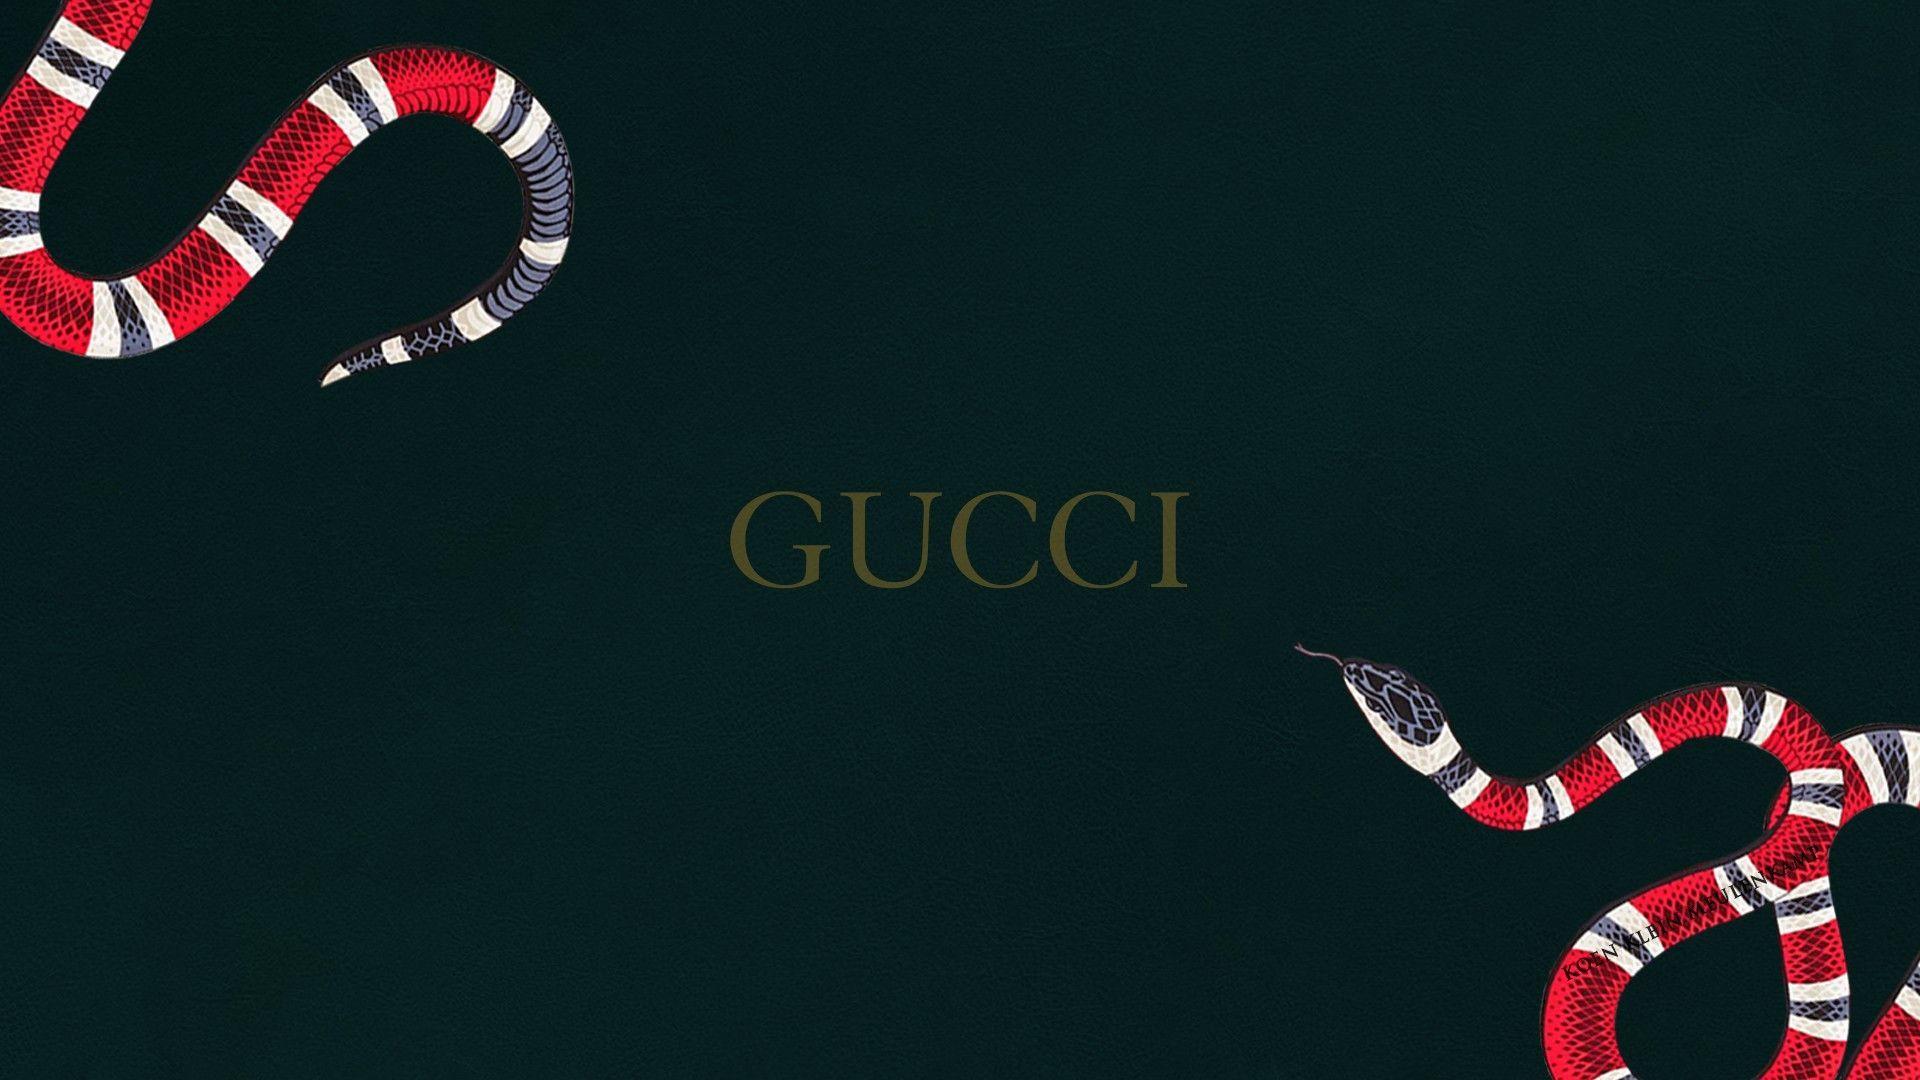 Gucci 4k Wallpapers - Top Free Gucci 4k Backgrounds - WallpaperAccess